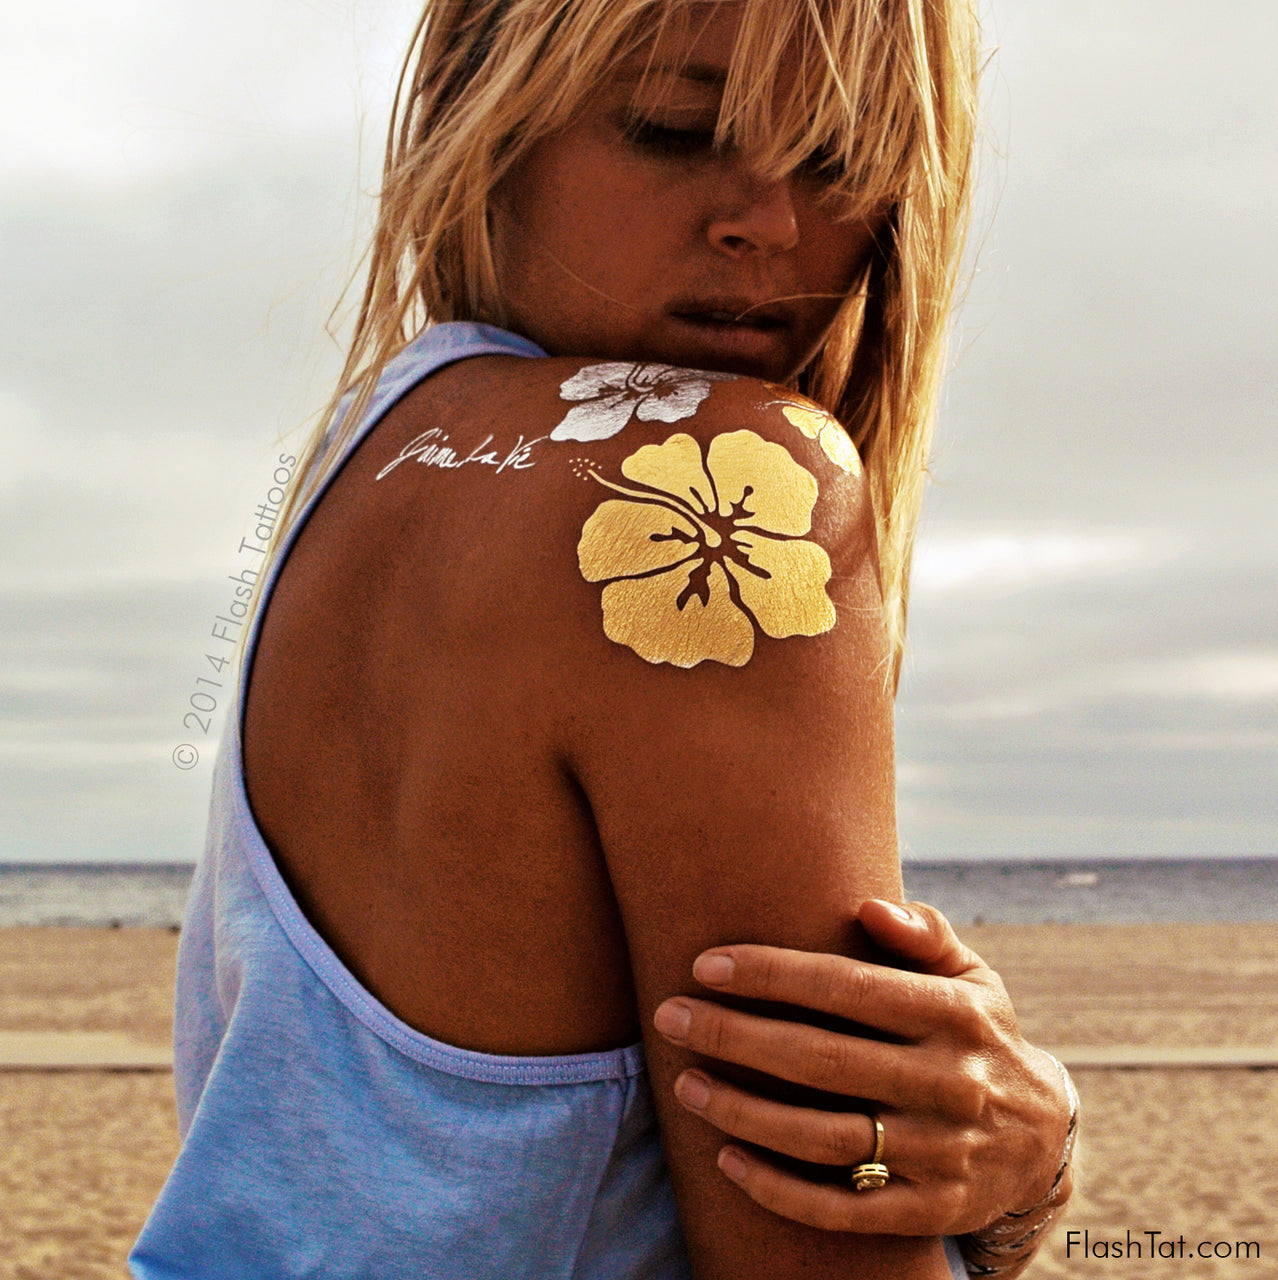 The tropical-inspired designs of the Flash Tattoos x Goldfish Kiss H2O collection look great when paired with your favorite bikini or sundress!